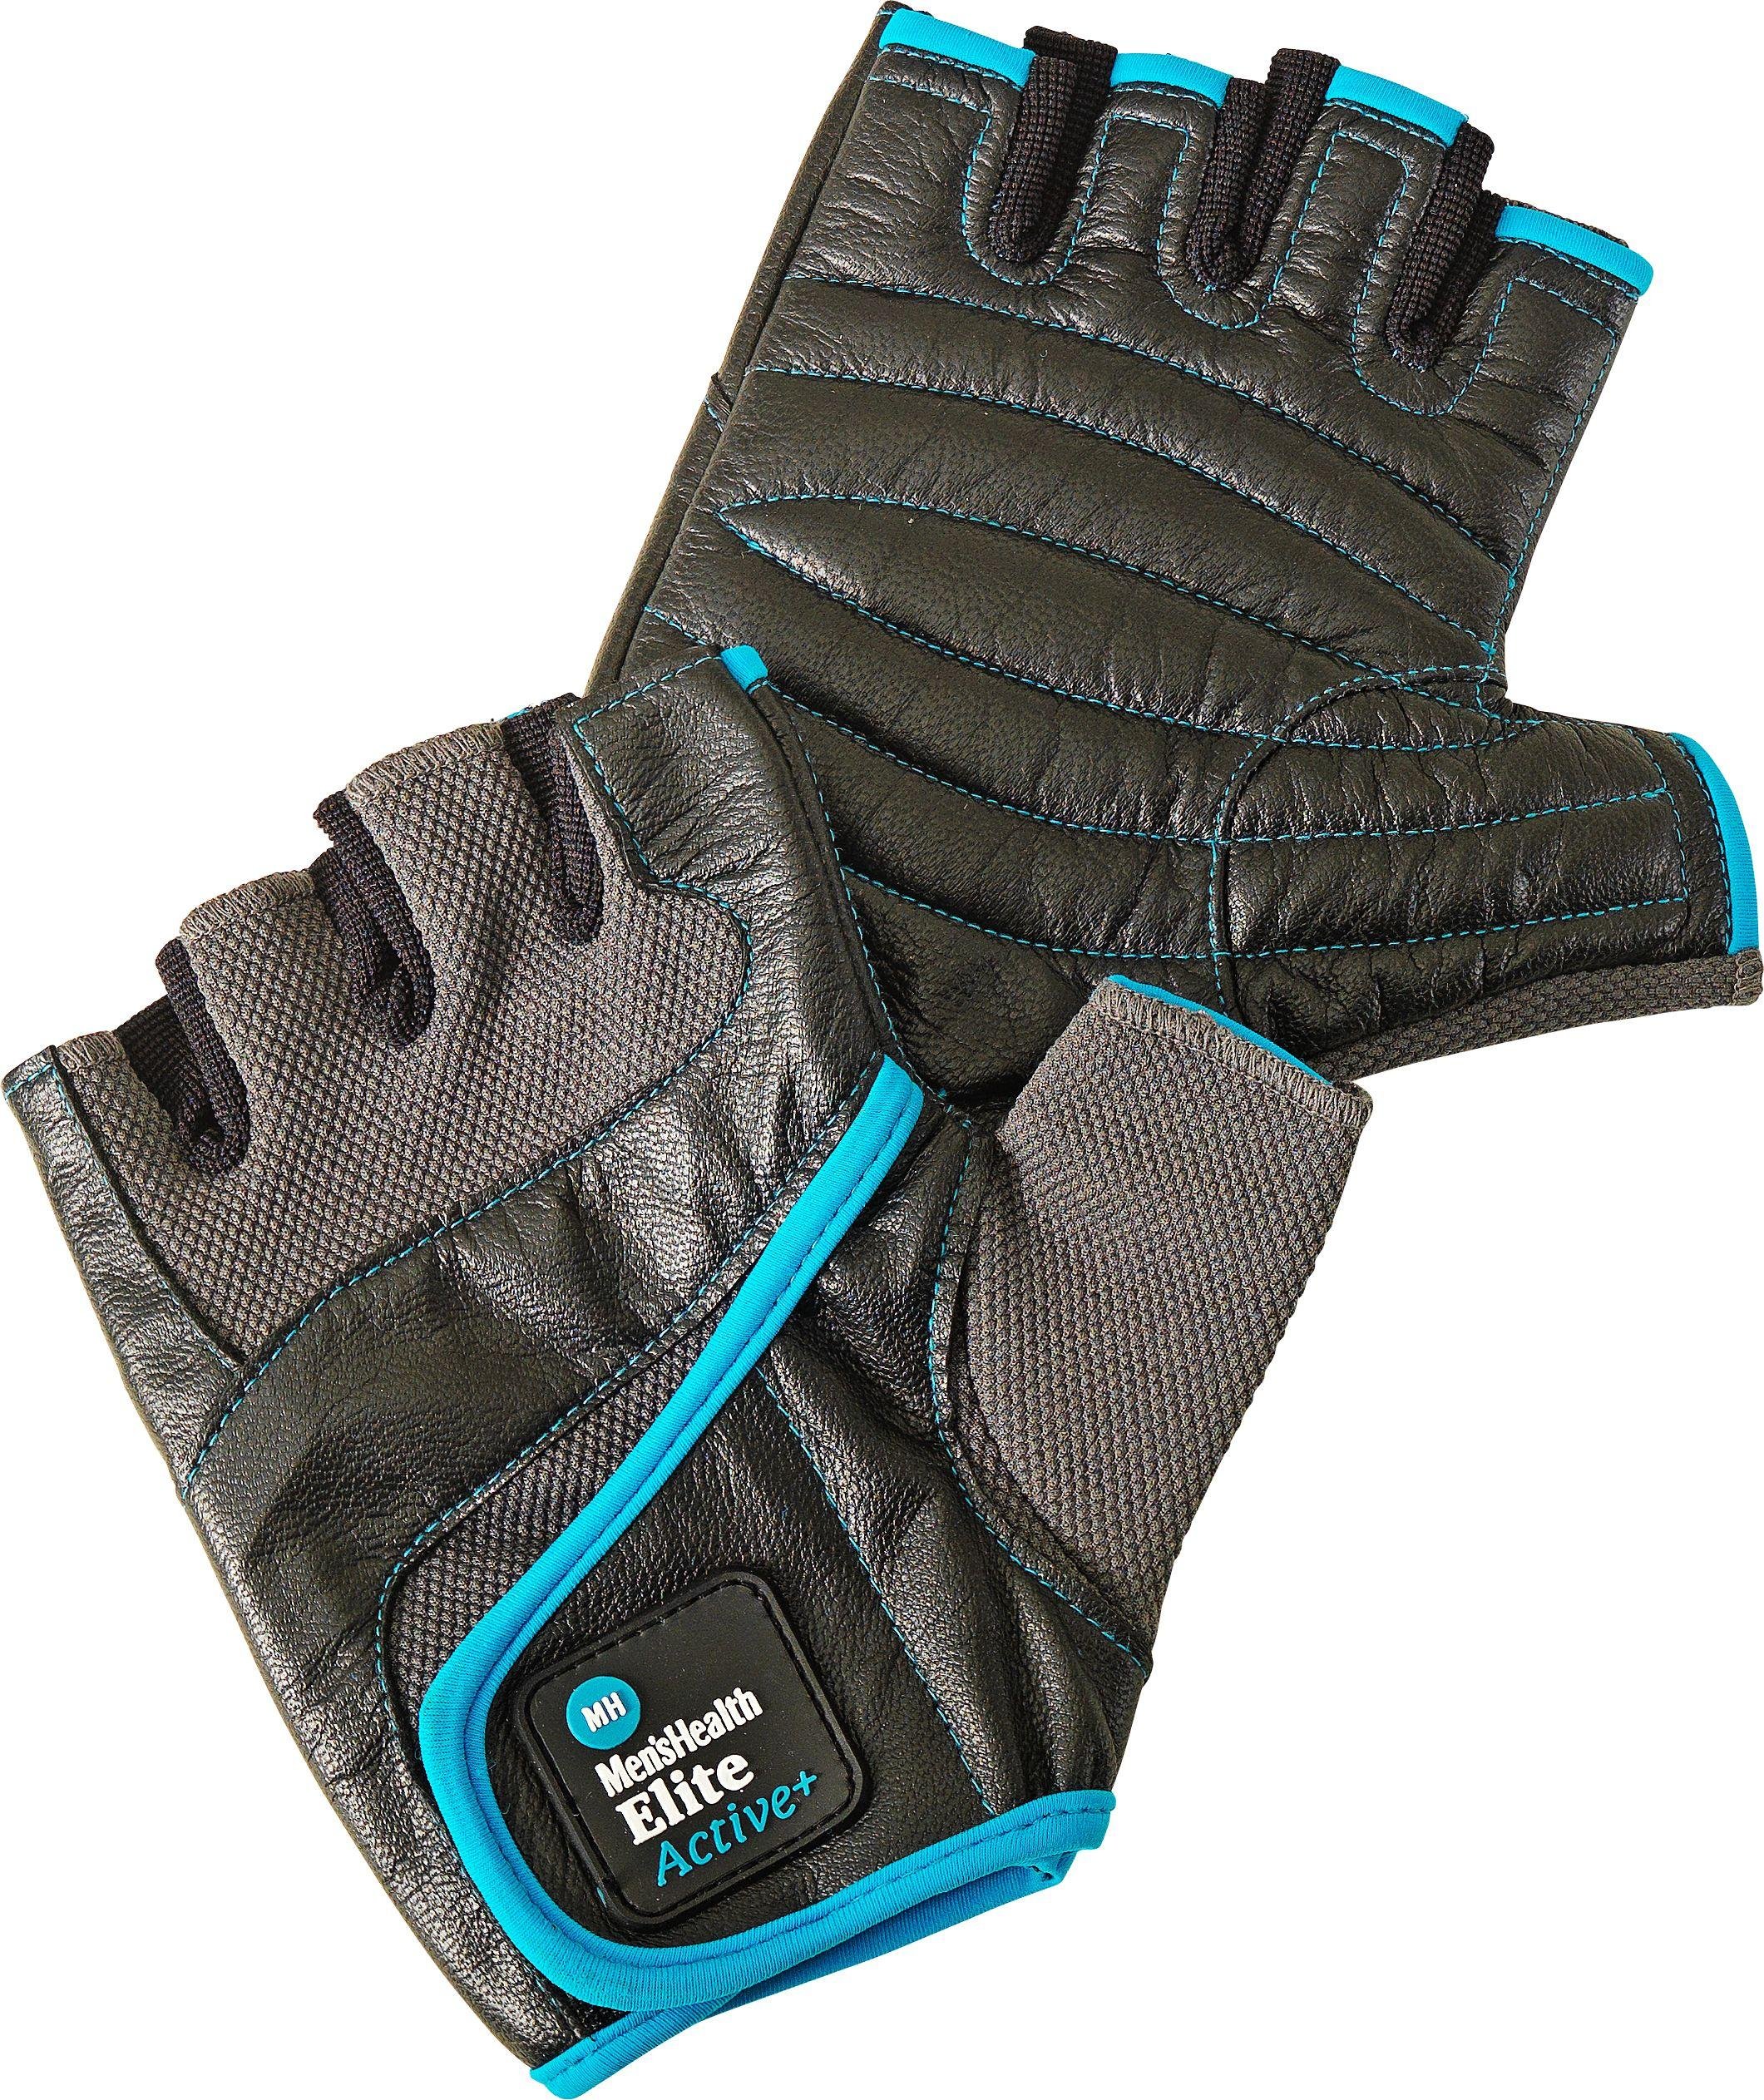 Men's Health Weight Lifting Gloves